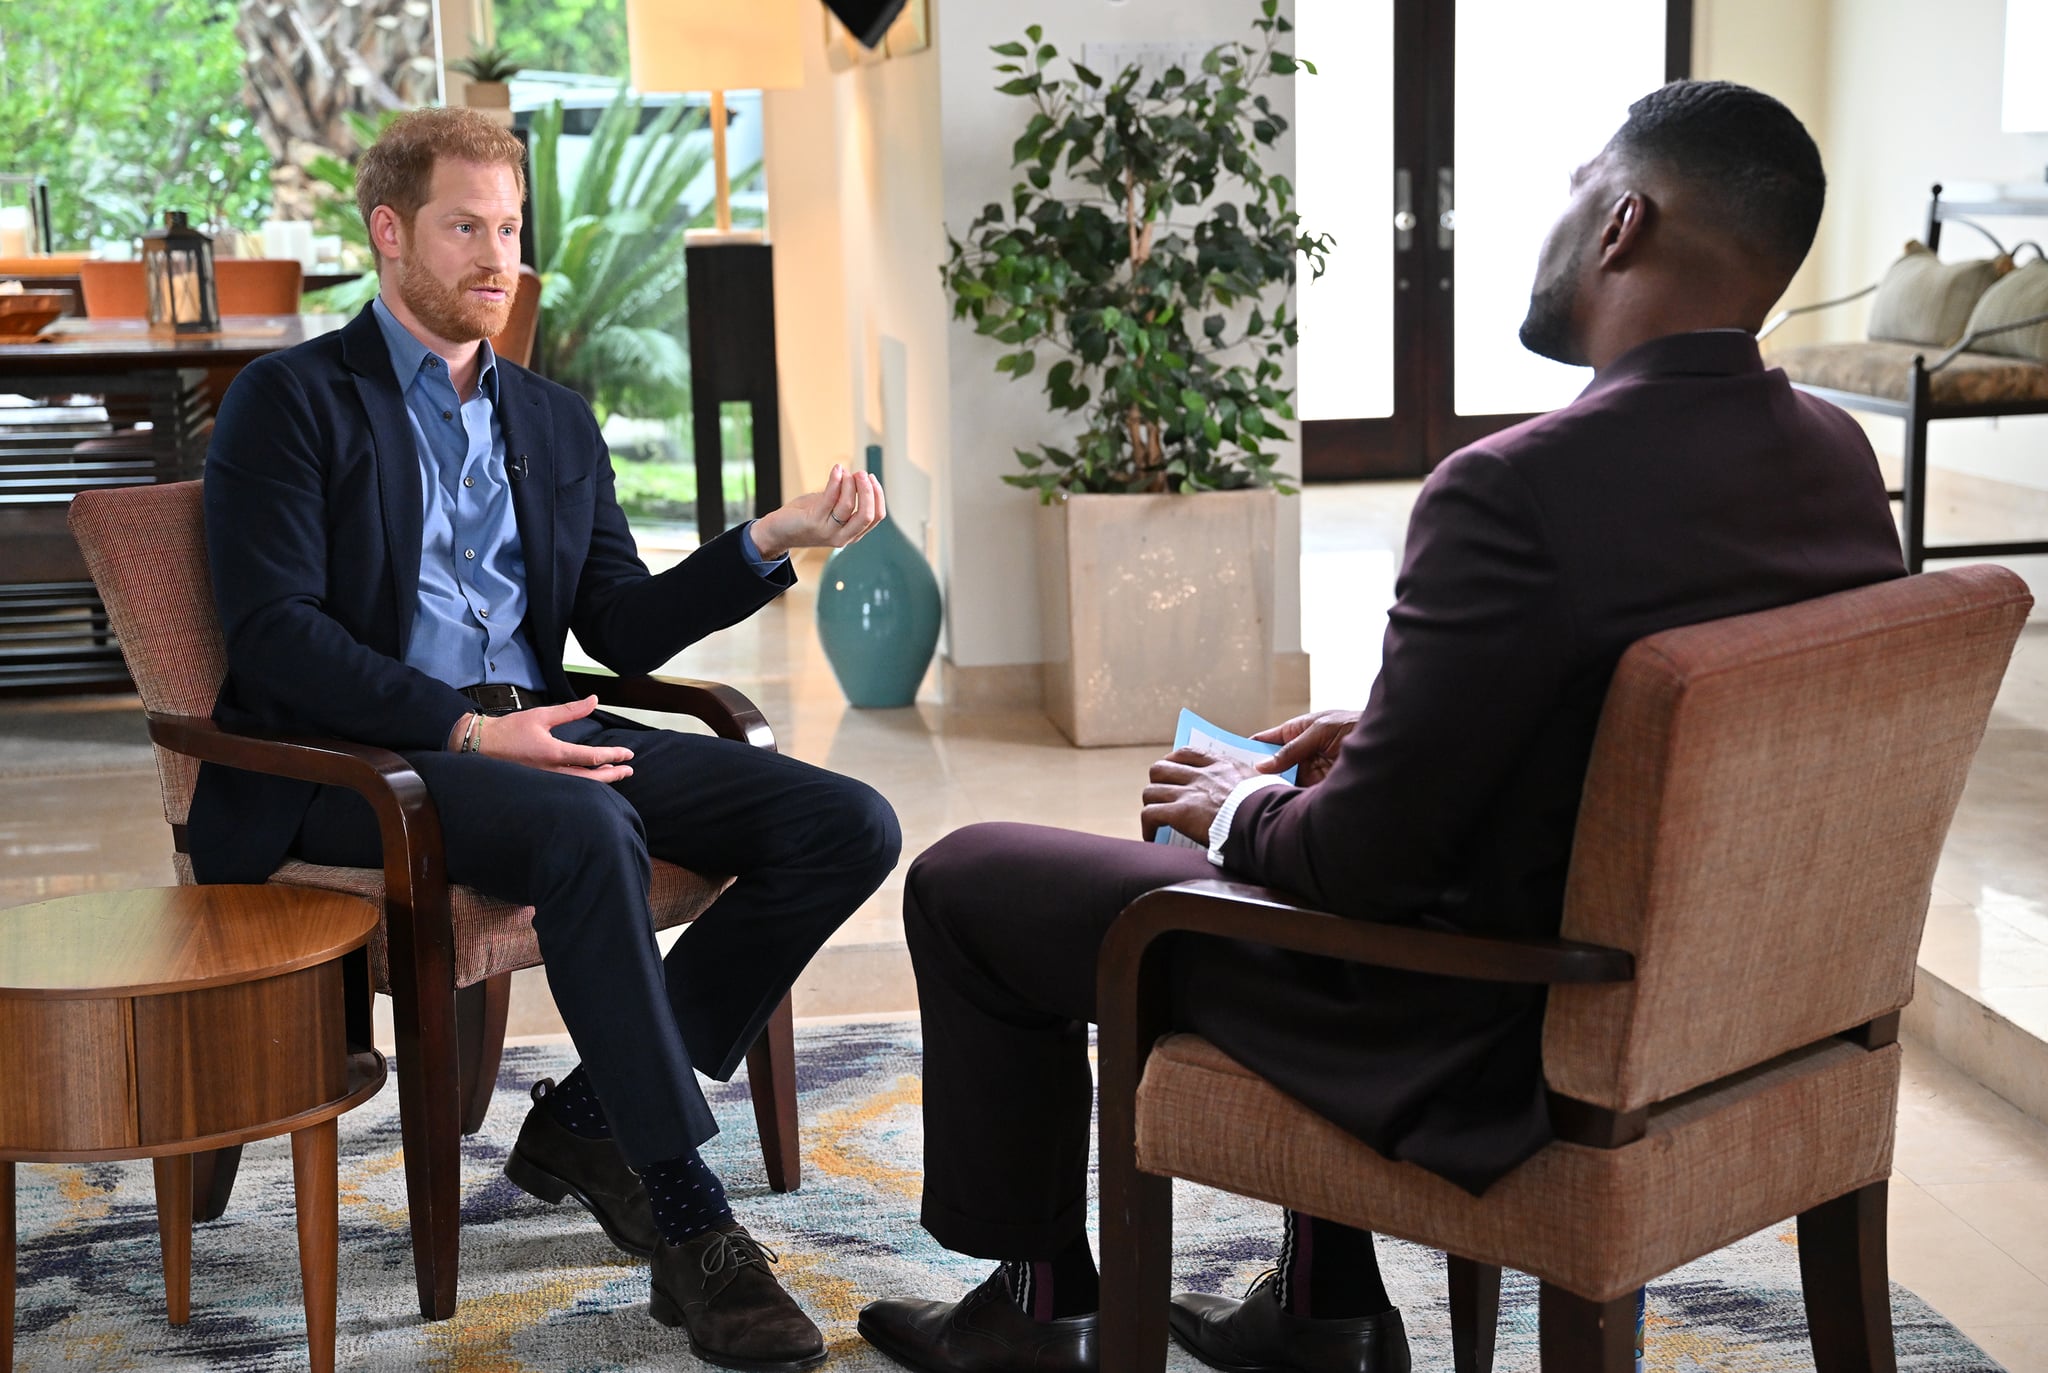 GOOD MORNING AMERICA  - Michael Strahan interviews Prince Harry in Los Angeles, California on Tuesday, January 3, 2023.  The interview airs Monday, January 9, 2023 on ABC's ''Good Morning America.'' (ABC/Richard Harbaugh) PRINCE HARRY, MICHAEL STRAHAN